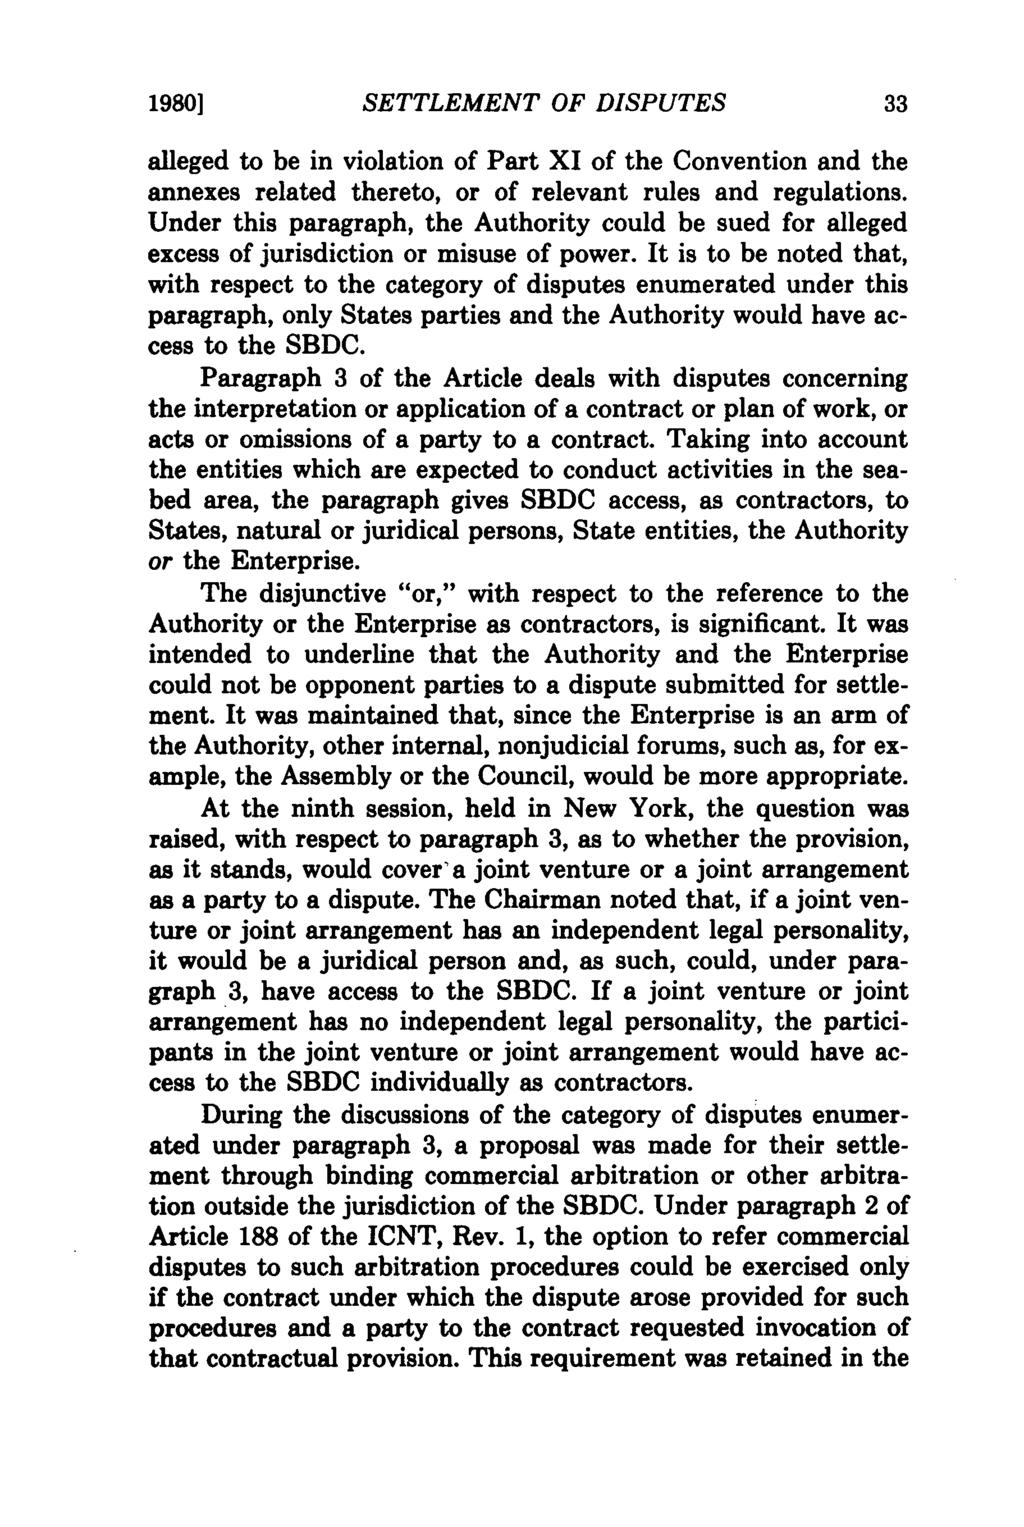 1980] SETTLEMENT OF DISPUTES alleged to be in violation of Part XI of the Convention and the annexes related thereto, or of relevant rules and regulations.